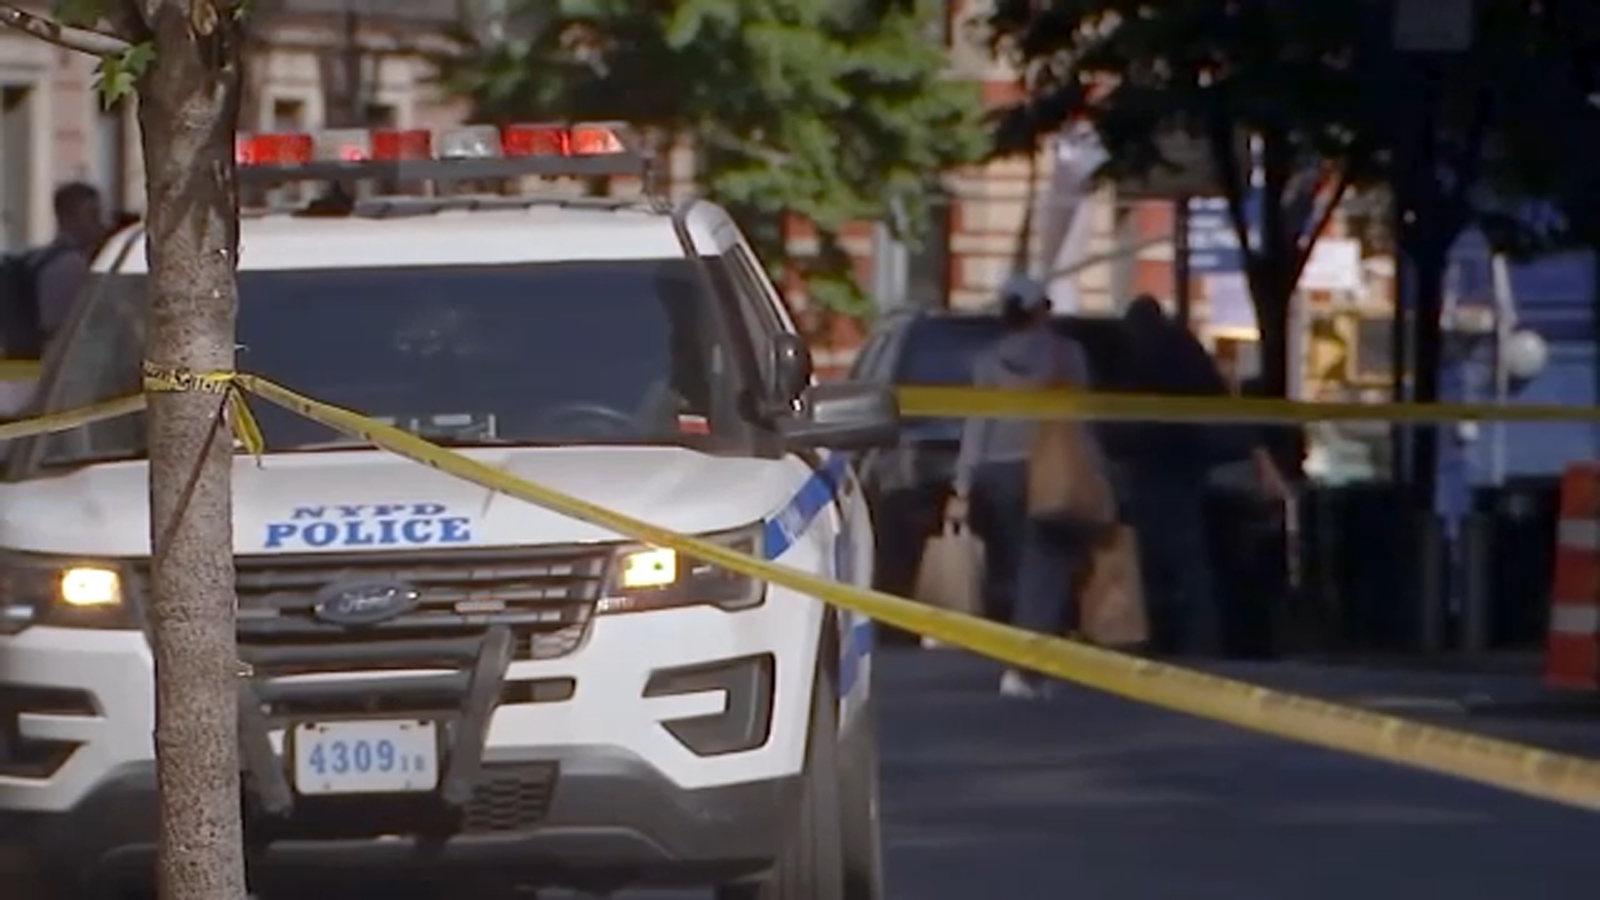 NYC teen violence: 2 teenagers shot, 1 fatally, 6 others stabbed in violent day across New York City [Video]